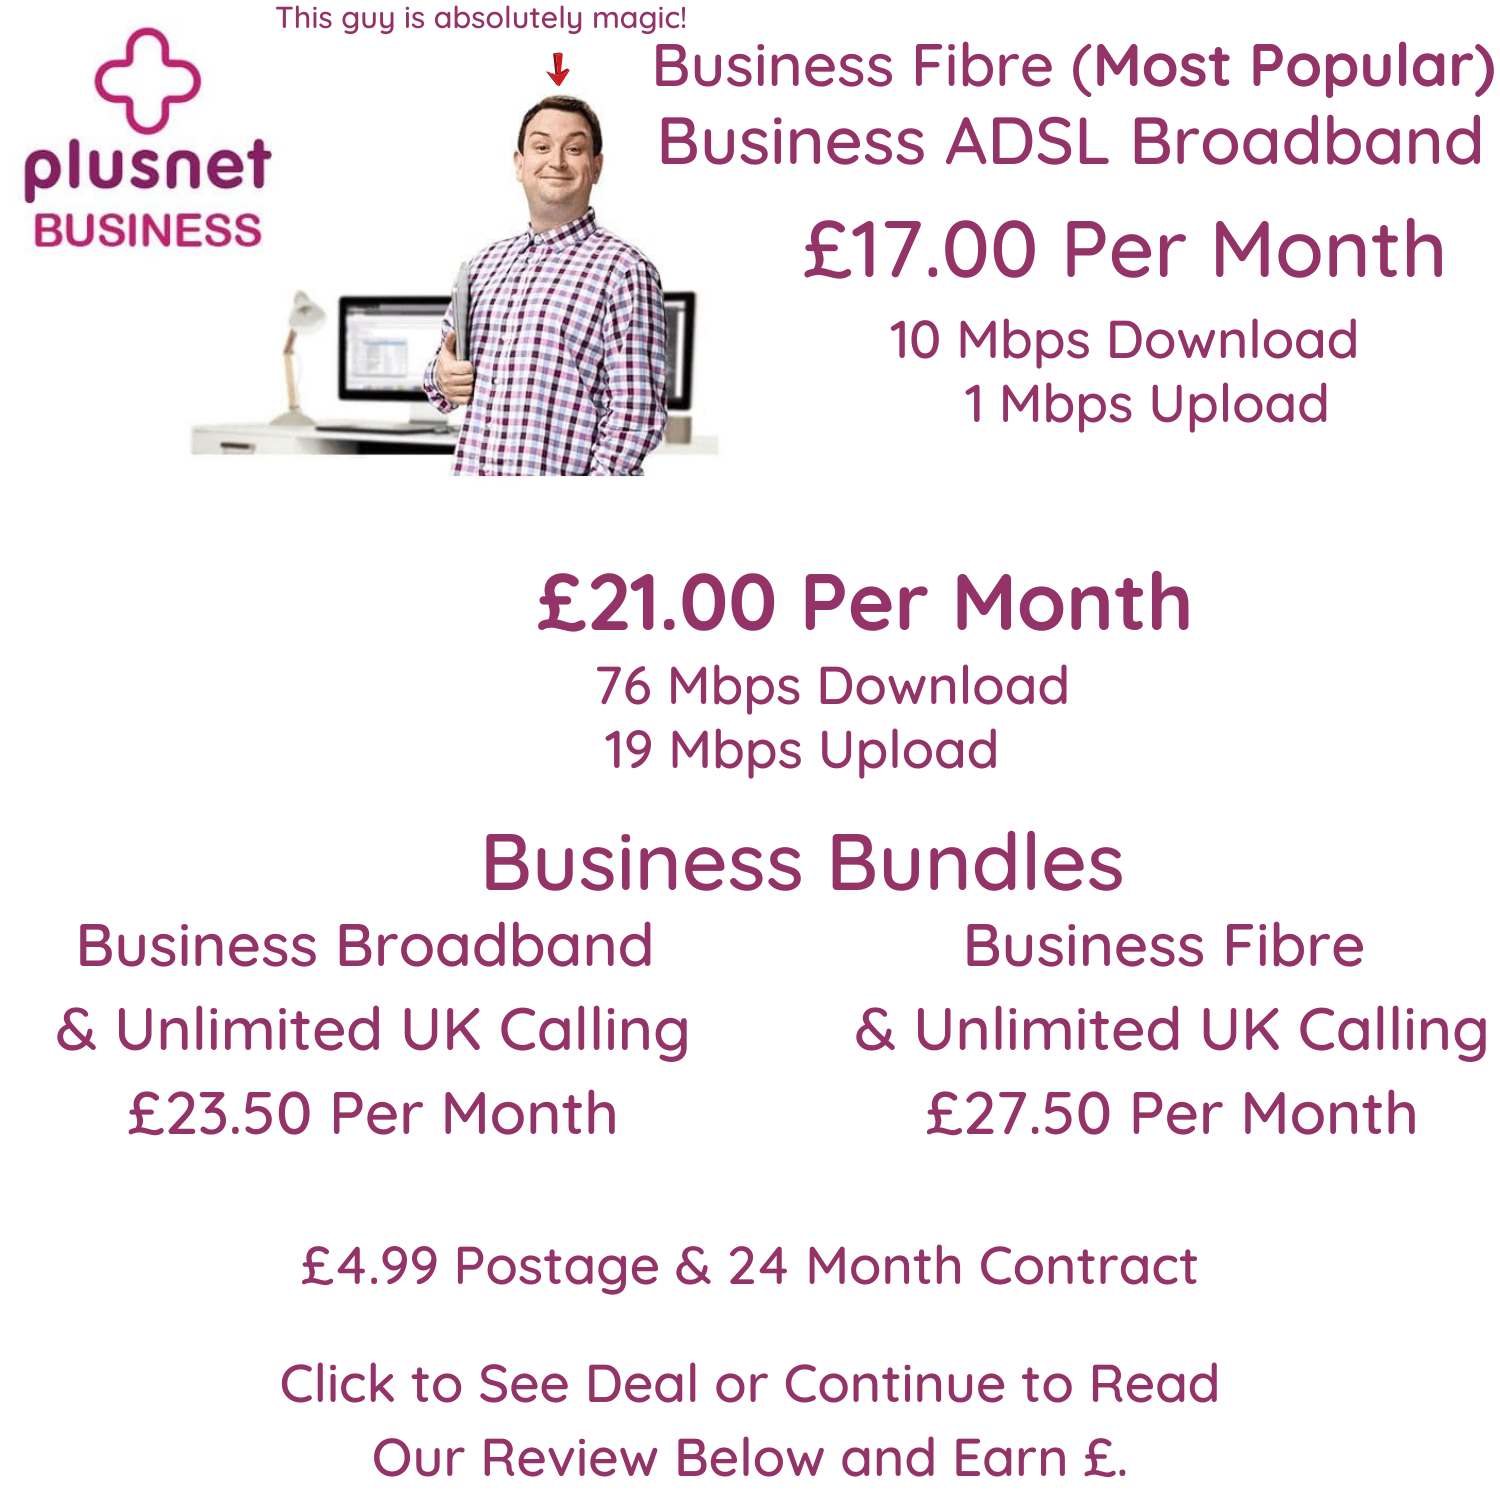 London Plusnet Business Broadband from £17.00 per month for 10 Mbps ADSL broadband or £21 per month for Plusnet Business Fibre broadband with 76 Mbps download speeds and 19 Mbps upload business speeds for customers in London including counties Bexley, Sutton, and more.